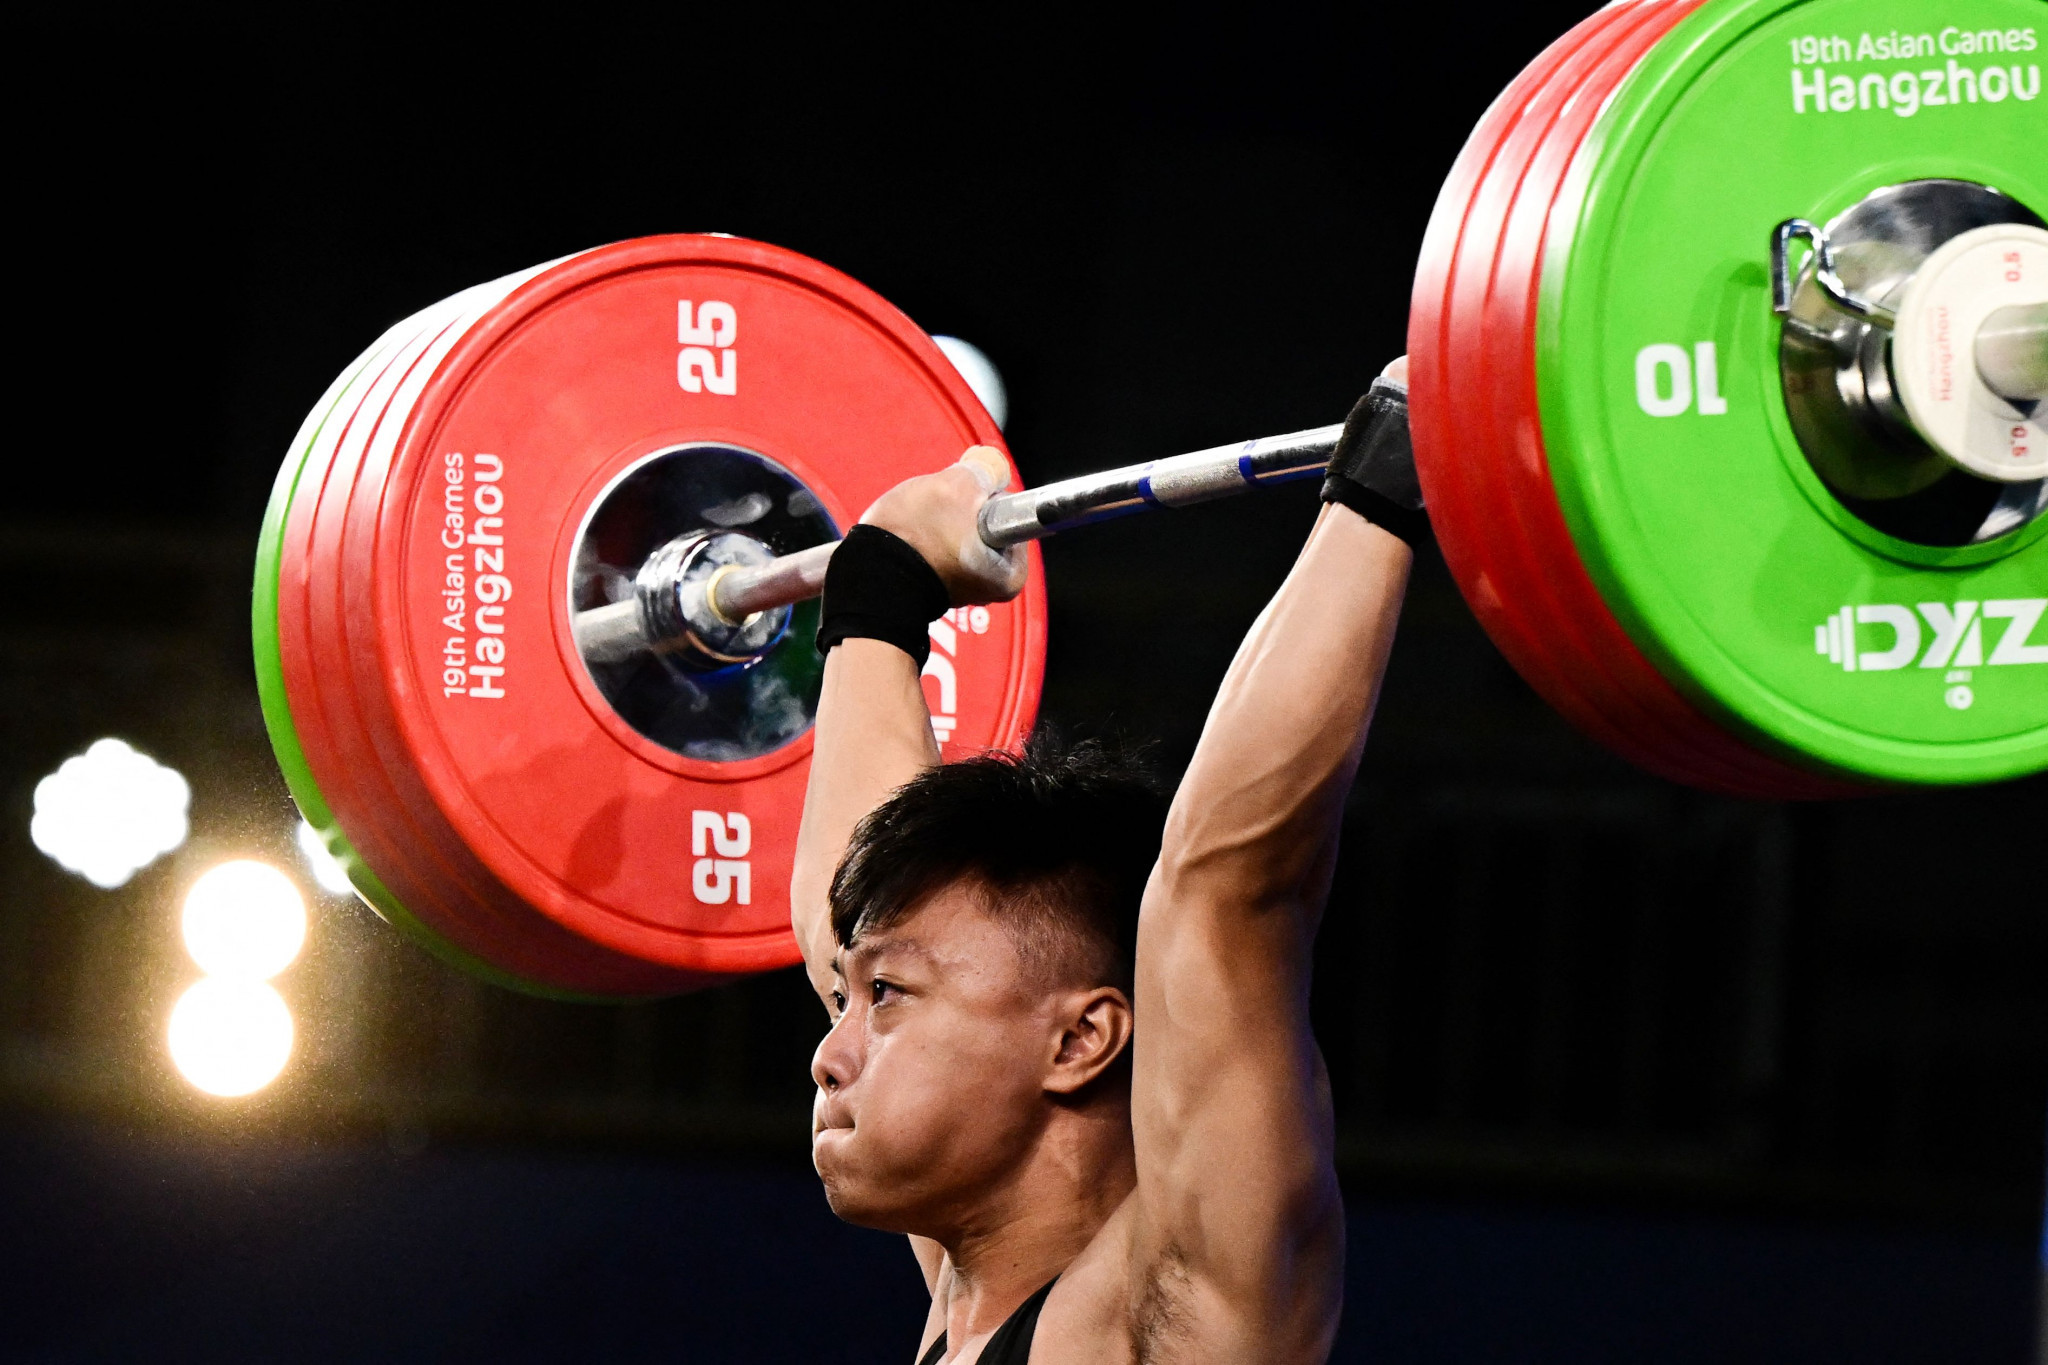 Rahmat Erwin Abdullah claimed the men's 73kg weightlifting gold medal with a Games record total of 359 ©Getty Images